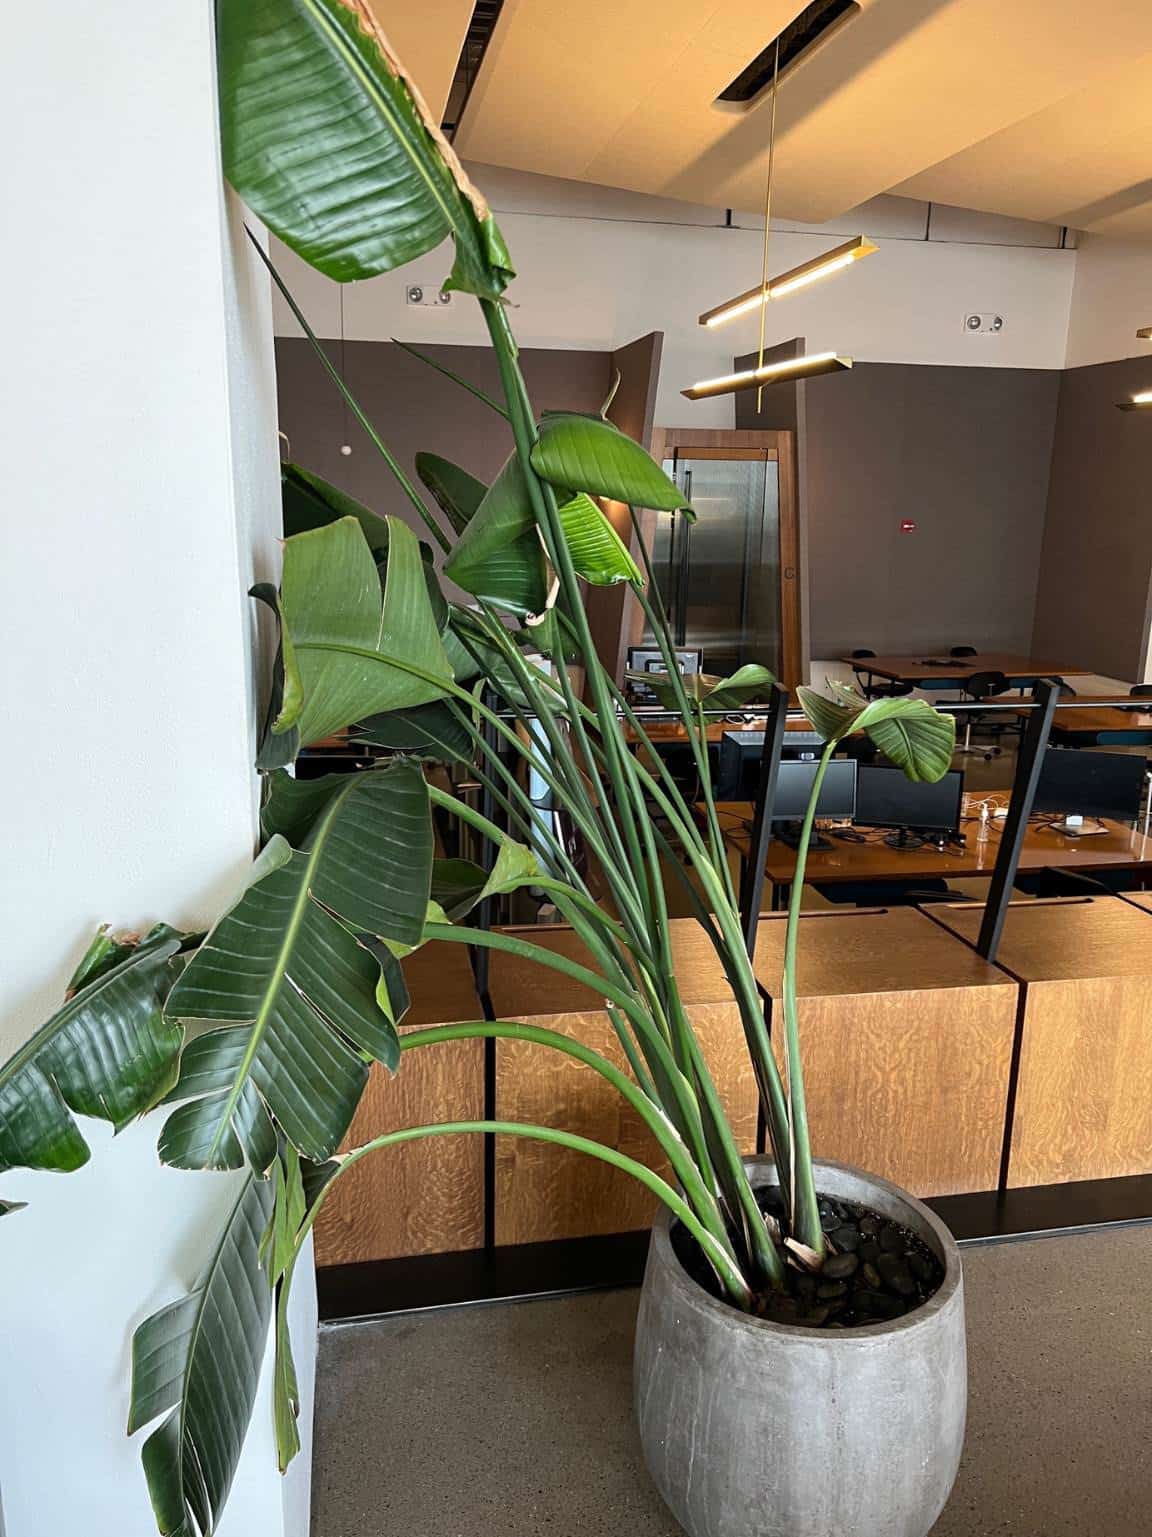 A bird of paradise plant with signs of wilting in a concrete pot, inside a modern office space.